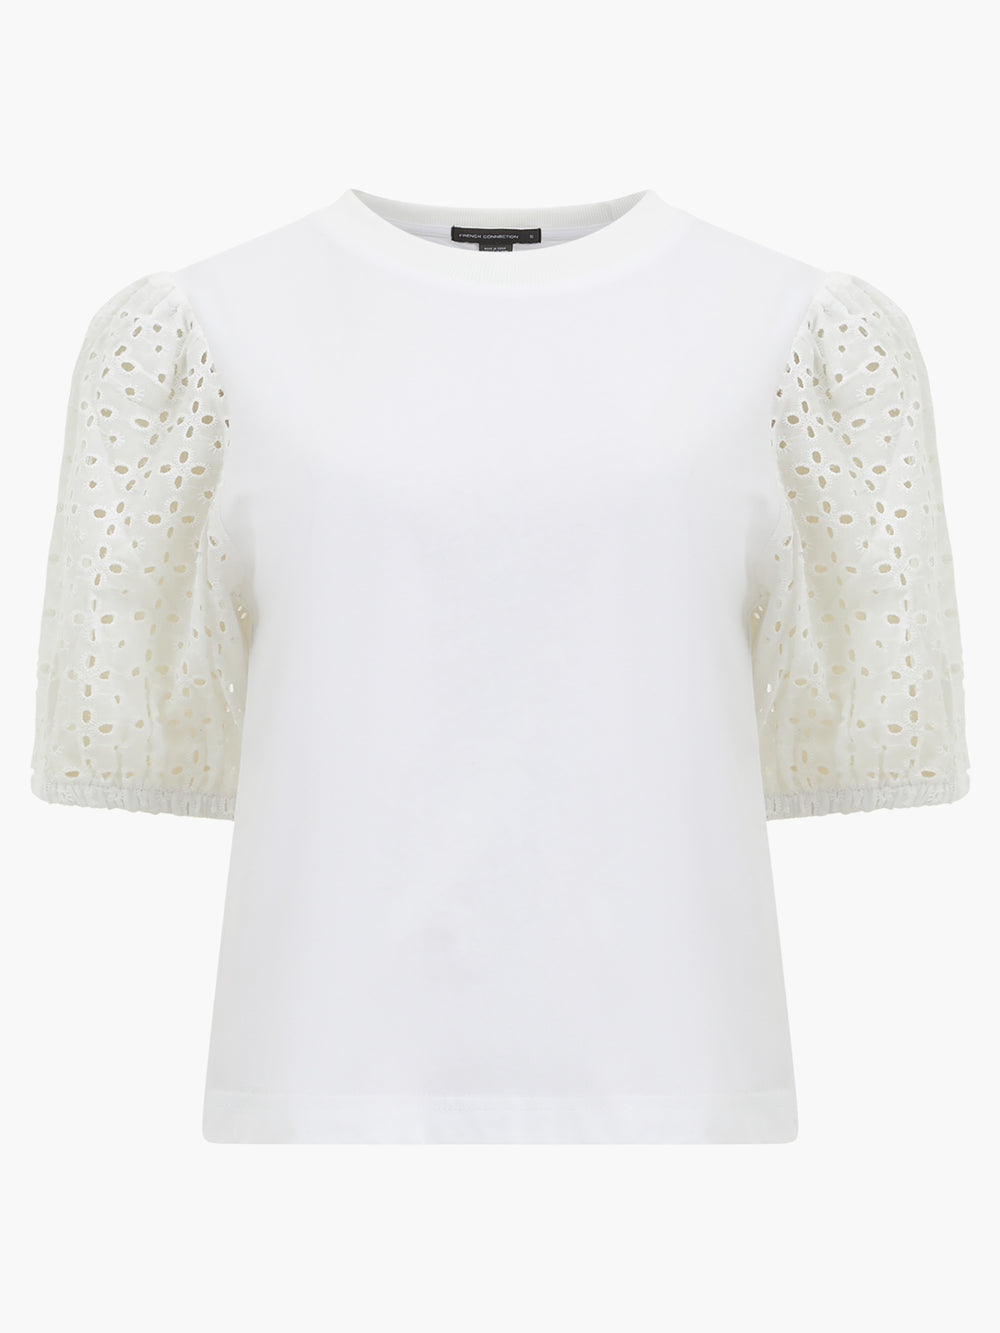 Anglaise Broderie Mix Sleeve Top White | French Connection UK